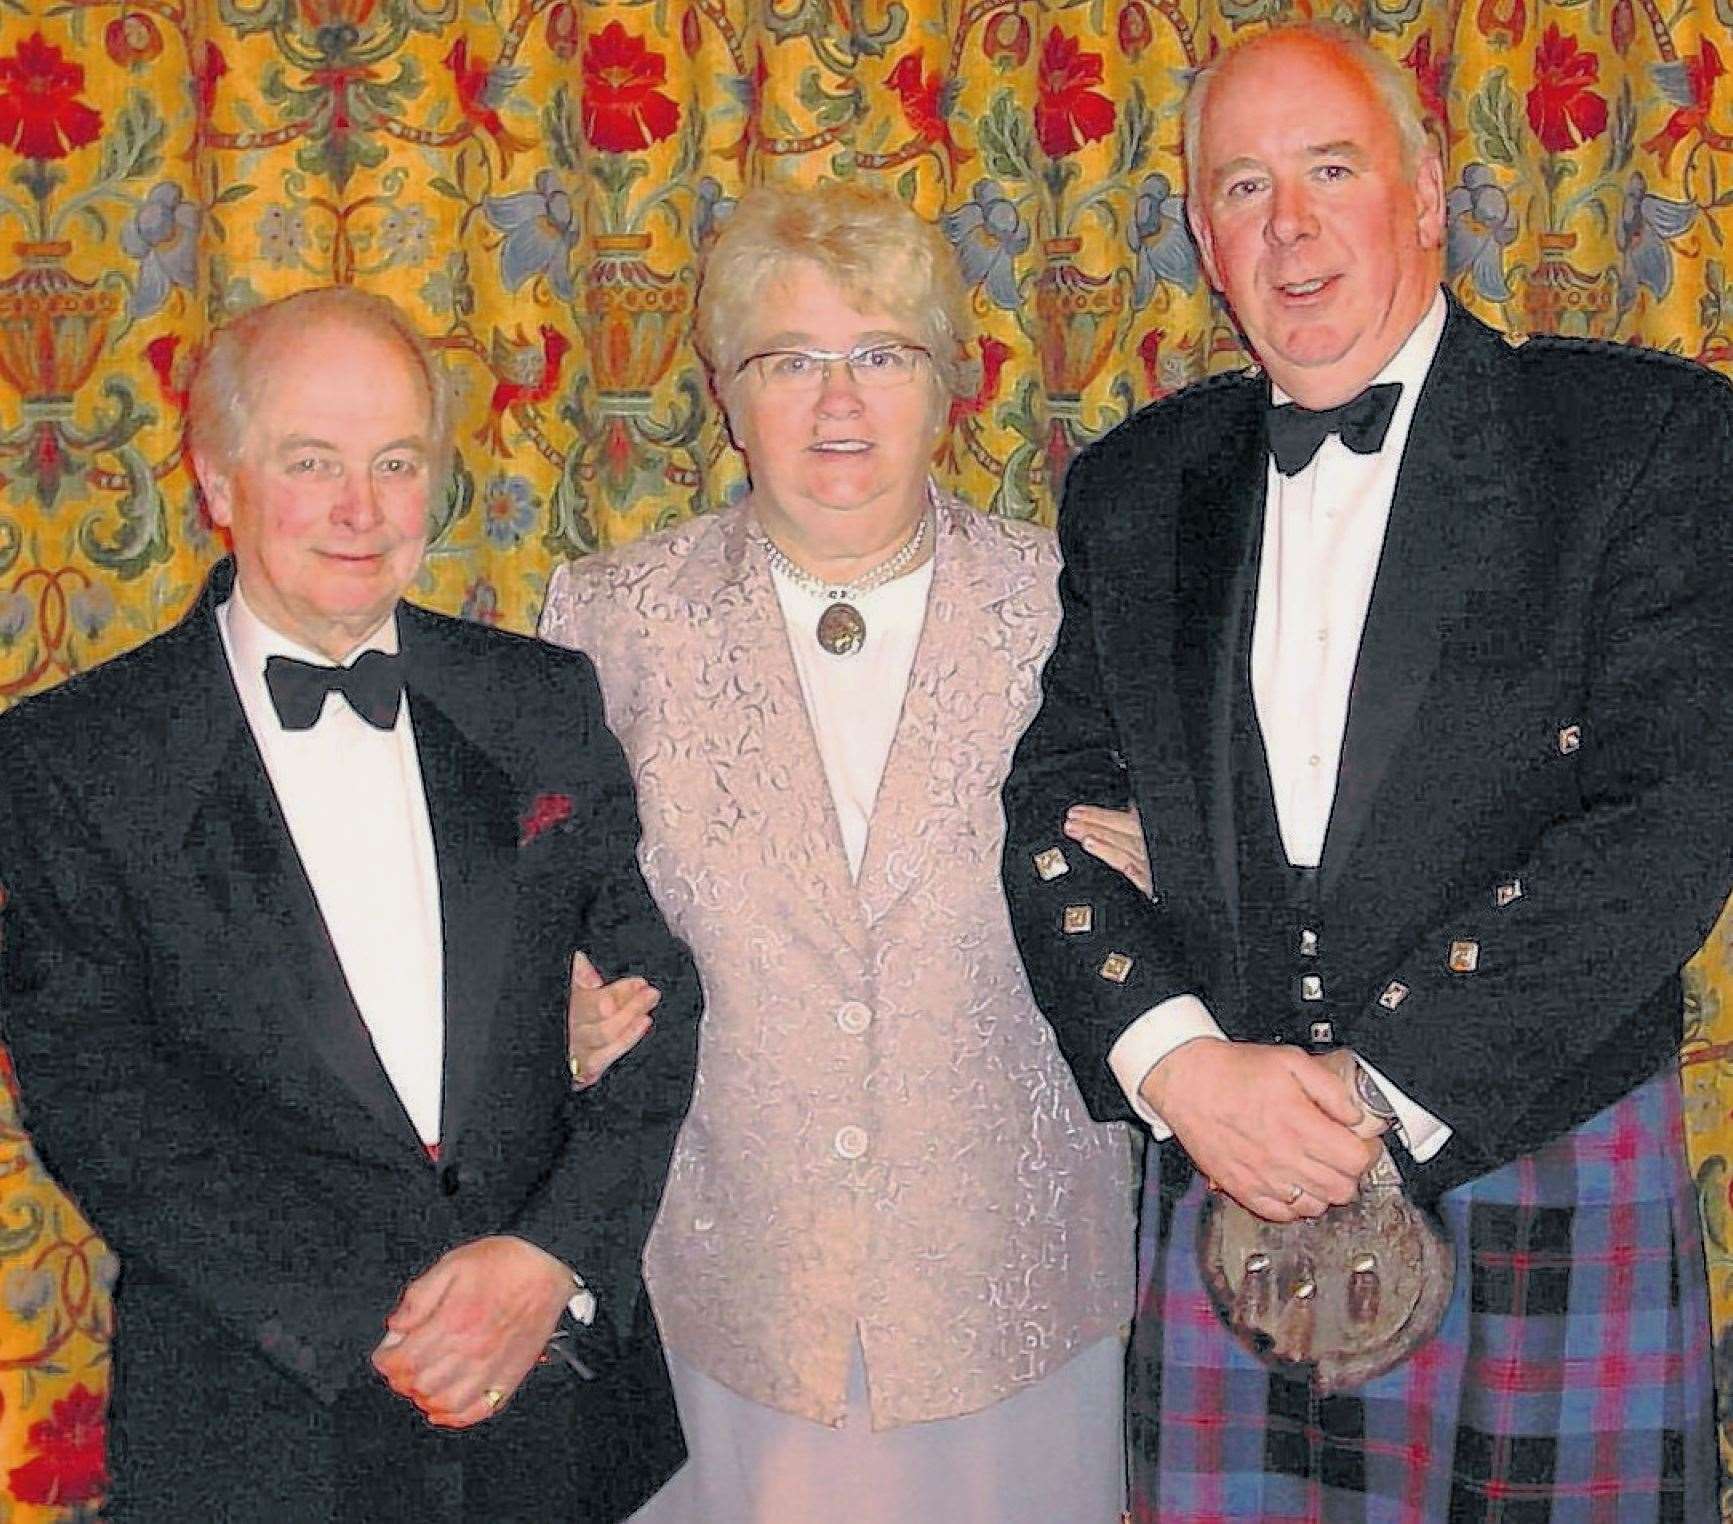 Captain Colin Farley-Sutton (left) in early 2007 after retiring as a Deputy Lord-Lieutenant of Caithness, along with his successor, Paul Cariss, and the then Lord-Lieutenant, Anne Dunnett.